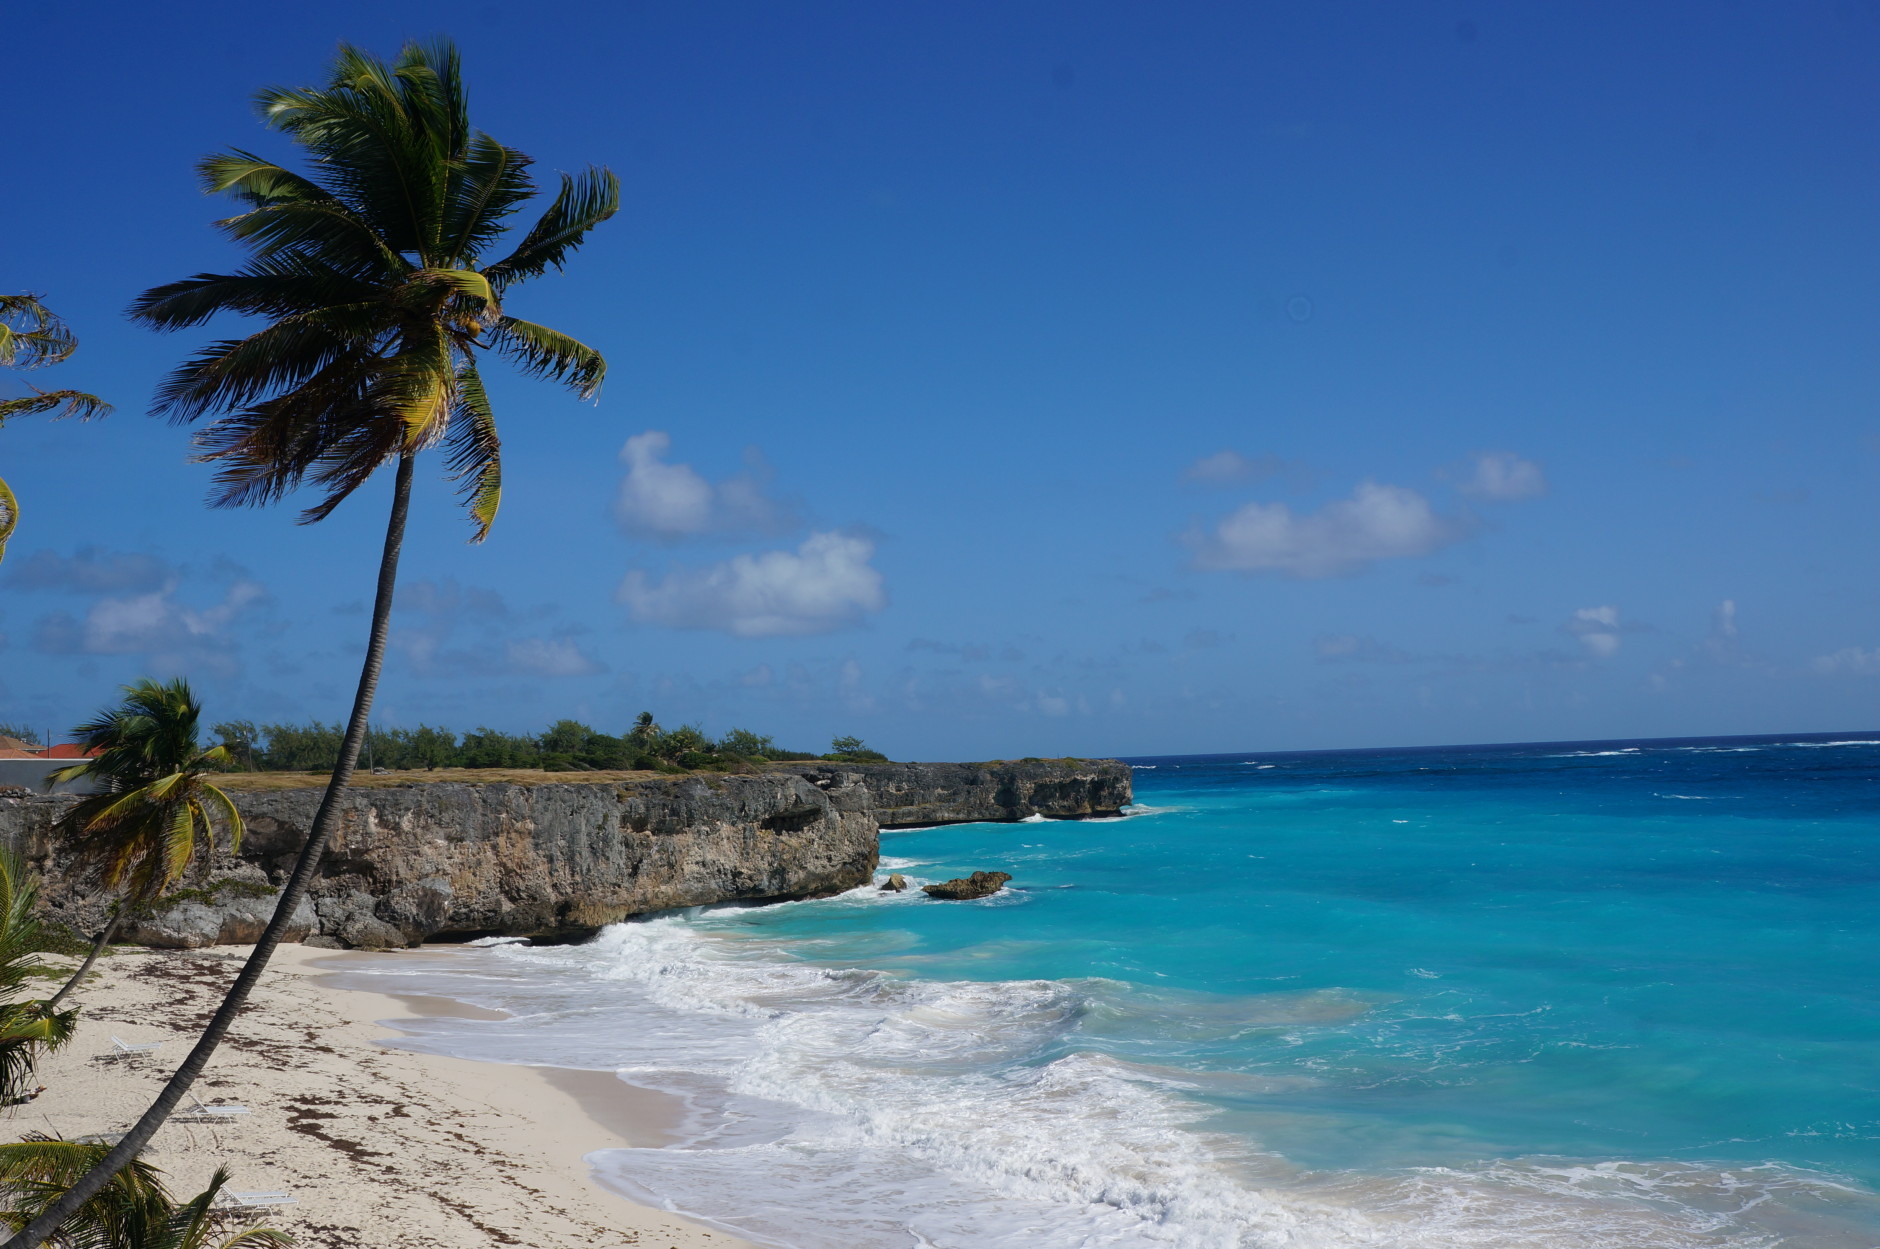 This January 2015 photo shows Bottom Bay in Barbados. The Caribbean island is relatively easy on the wallet, with easy-to-use public vans to beaches around the island, plus dining options like Oistins Fish Fry, an outdoor bazaar of restaurant shacks serving heaping plates of food. (AP Photo/Kavitha Surana)